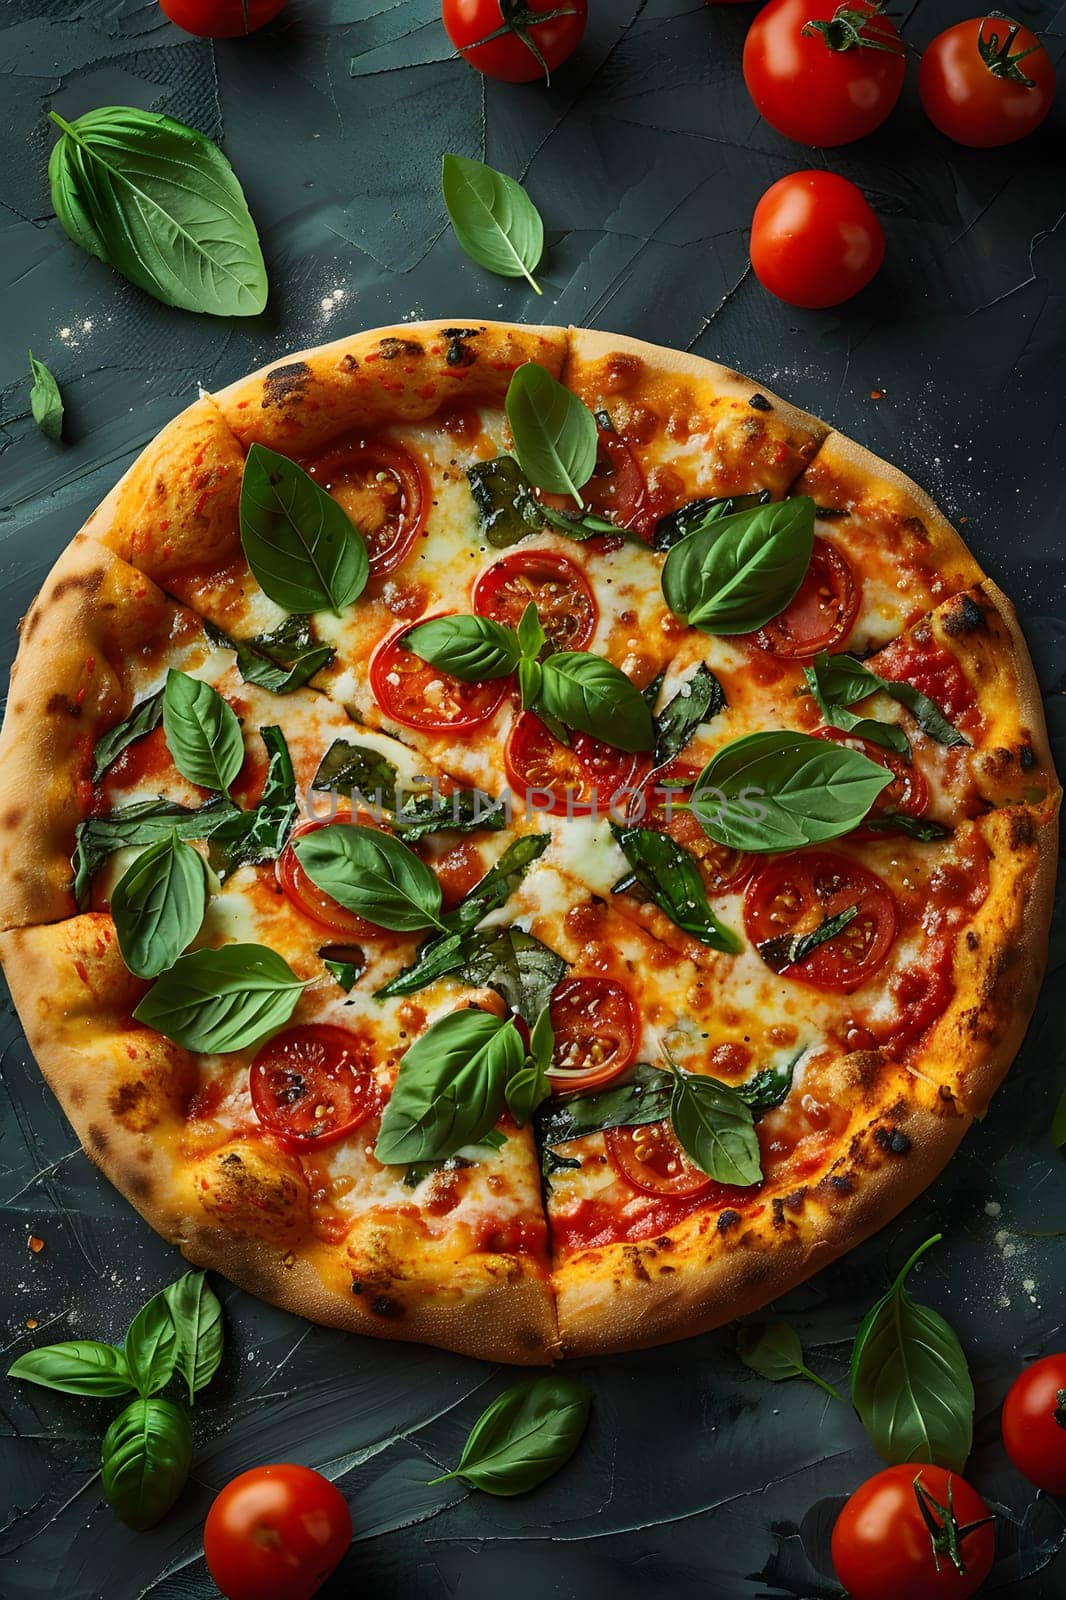 A delicious pizza topped with tomatoes, basil, and cheese is garnished with additional tomatoes and fresh basil leaves on a platter